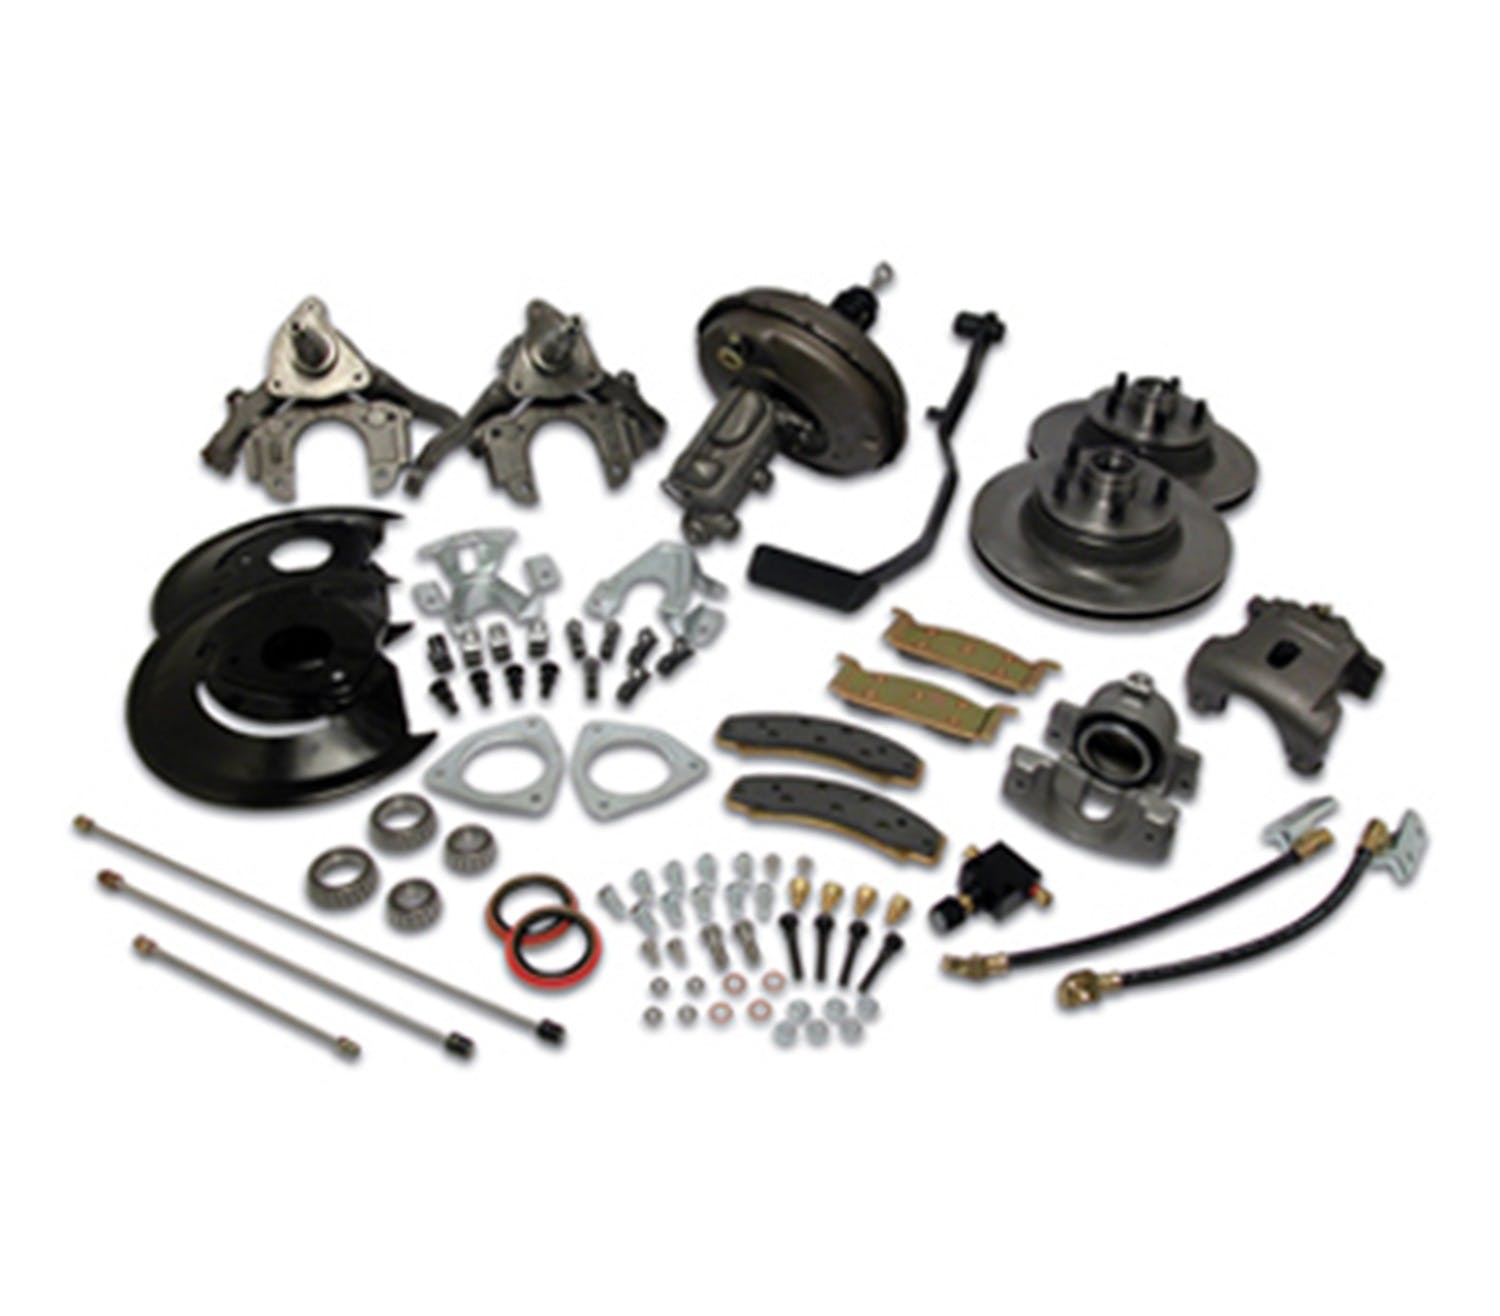 Stainless Steel Brakes A132-A Front conv kit 68-69 Must power a. tran